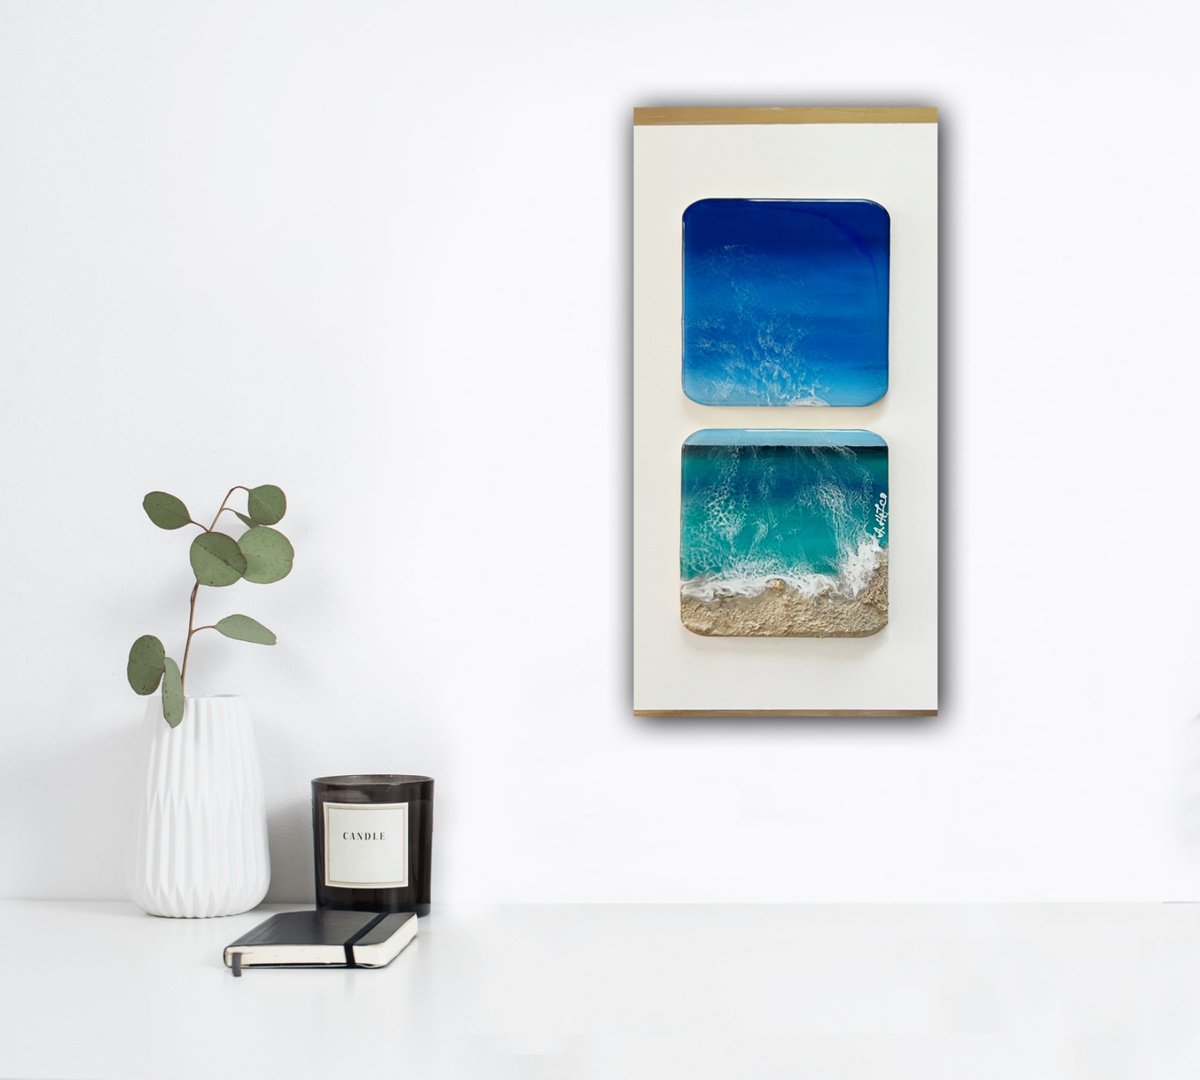 Little wave #15 - Small ocean painting diptych by Ana Hefco